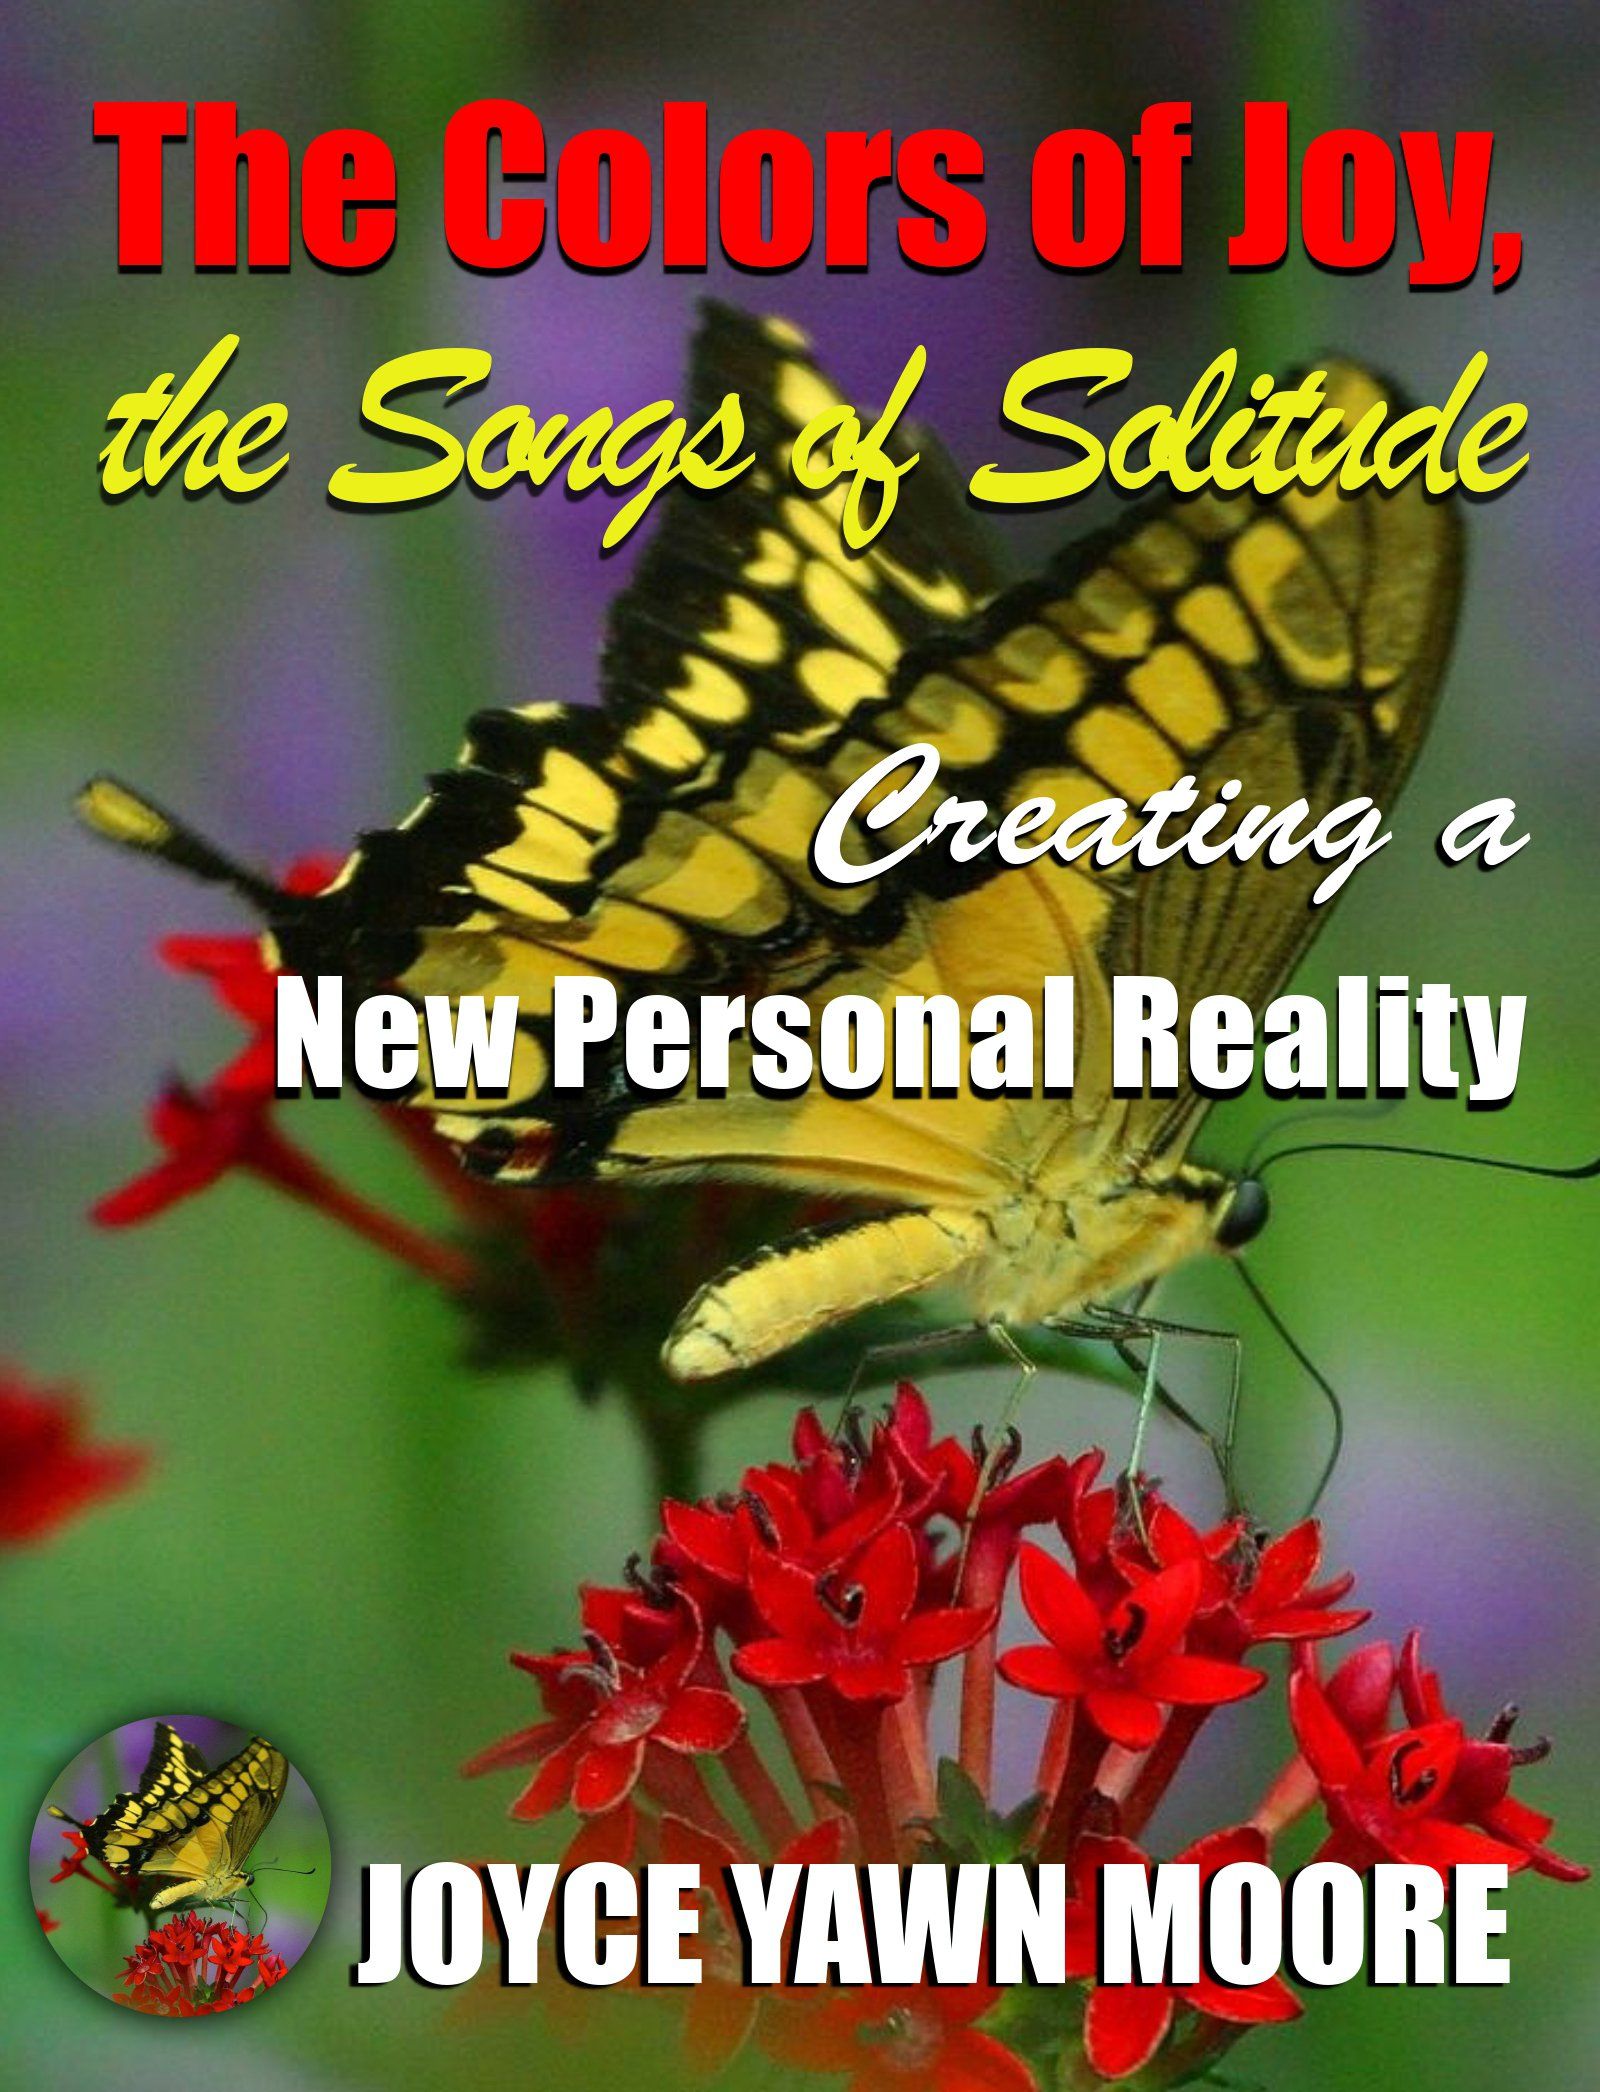 Creating a New Personal Reality